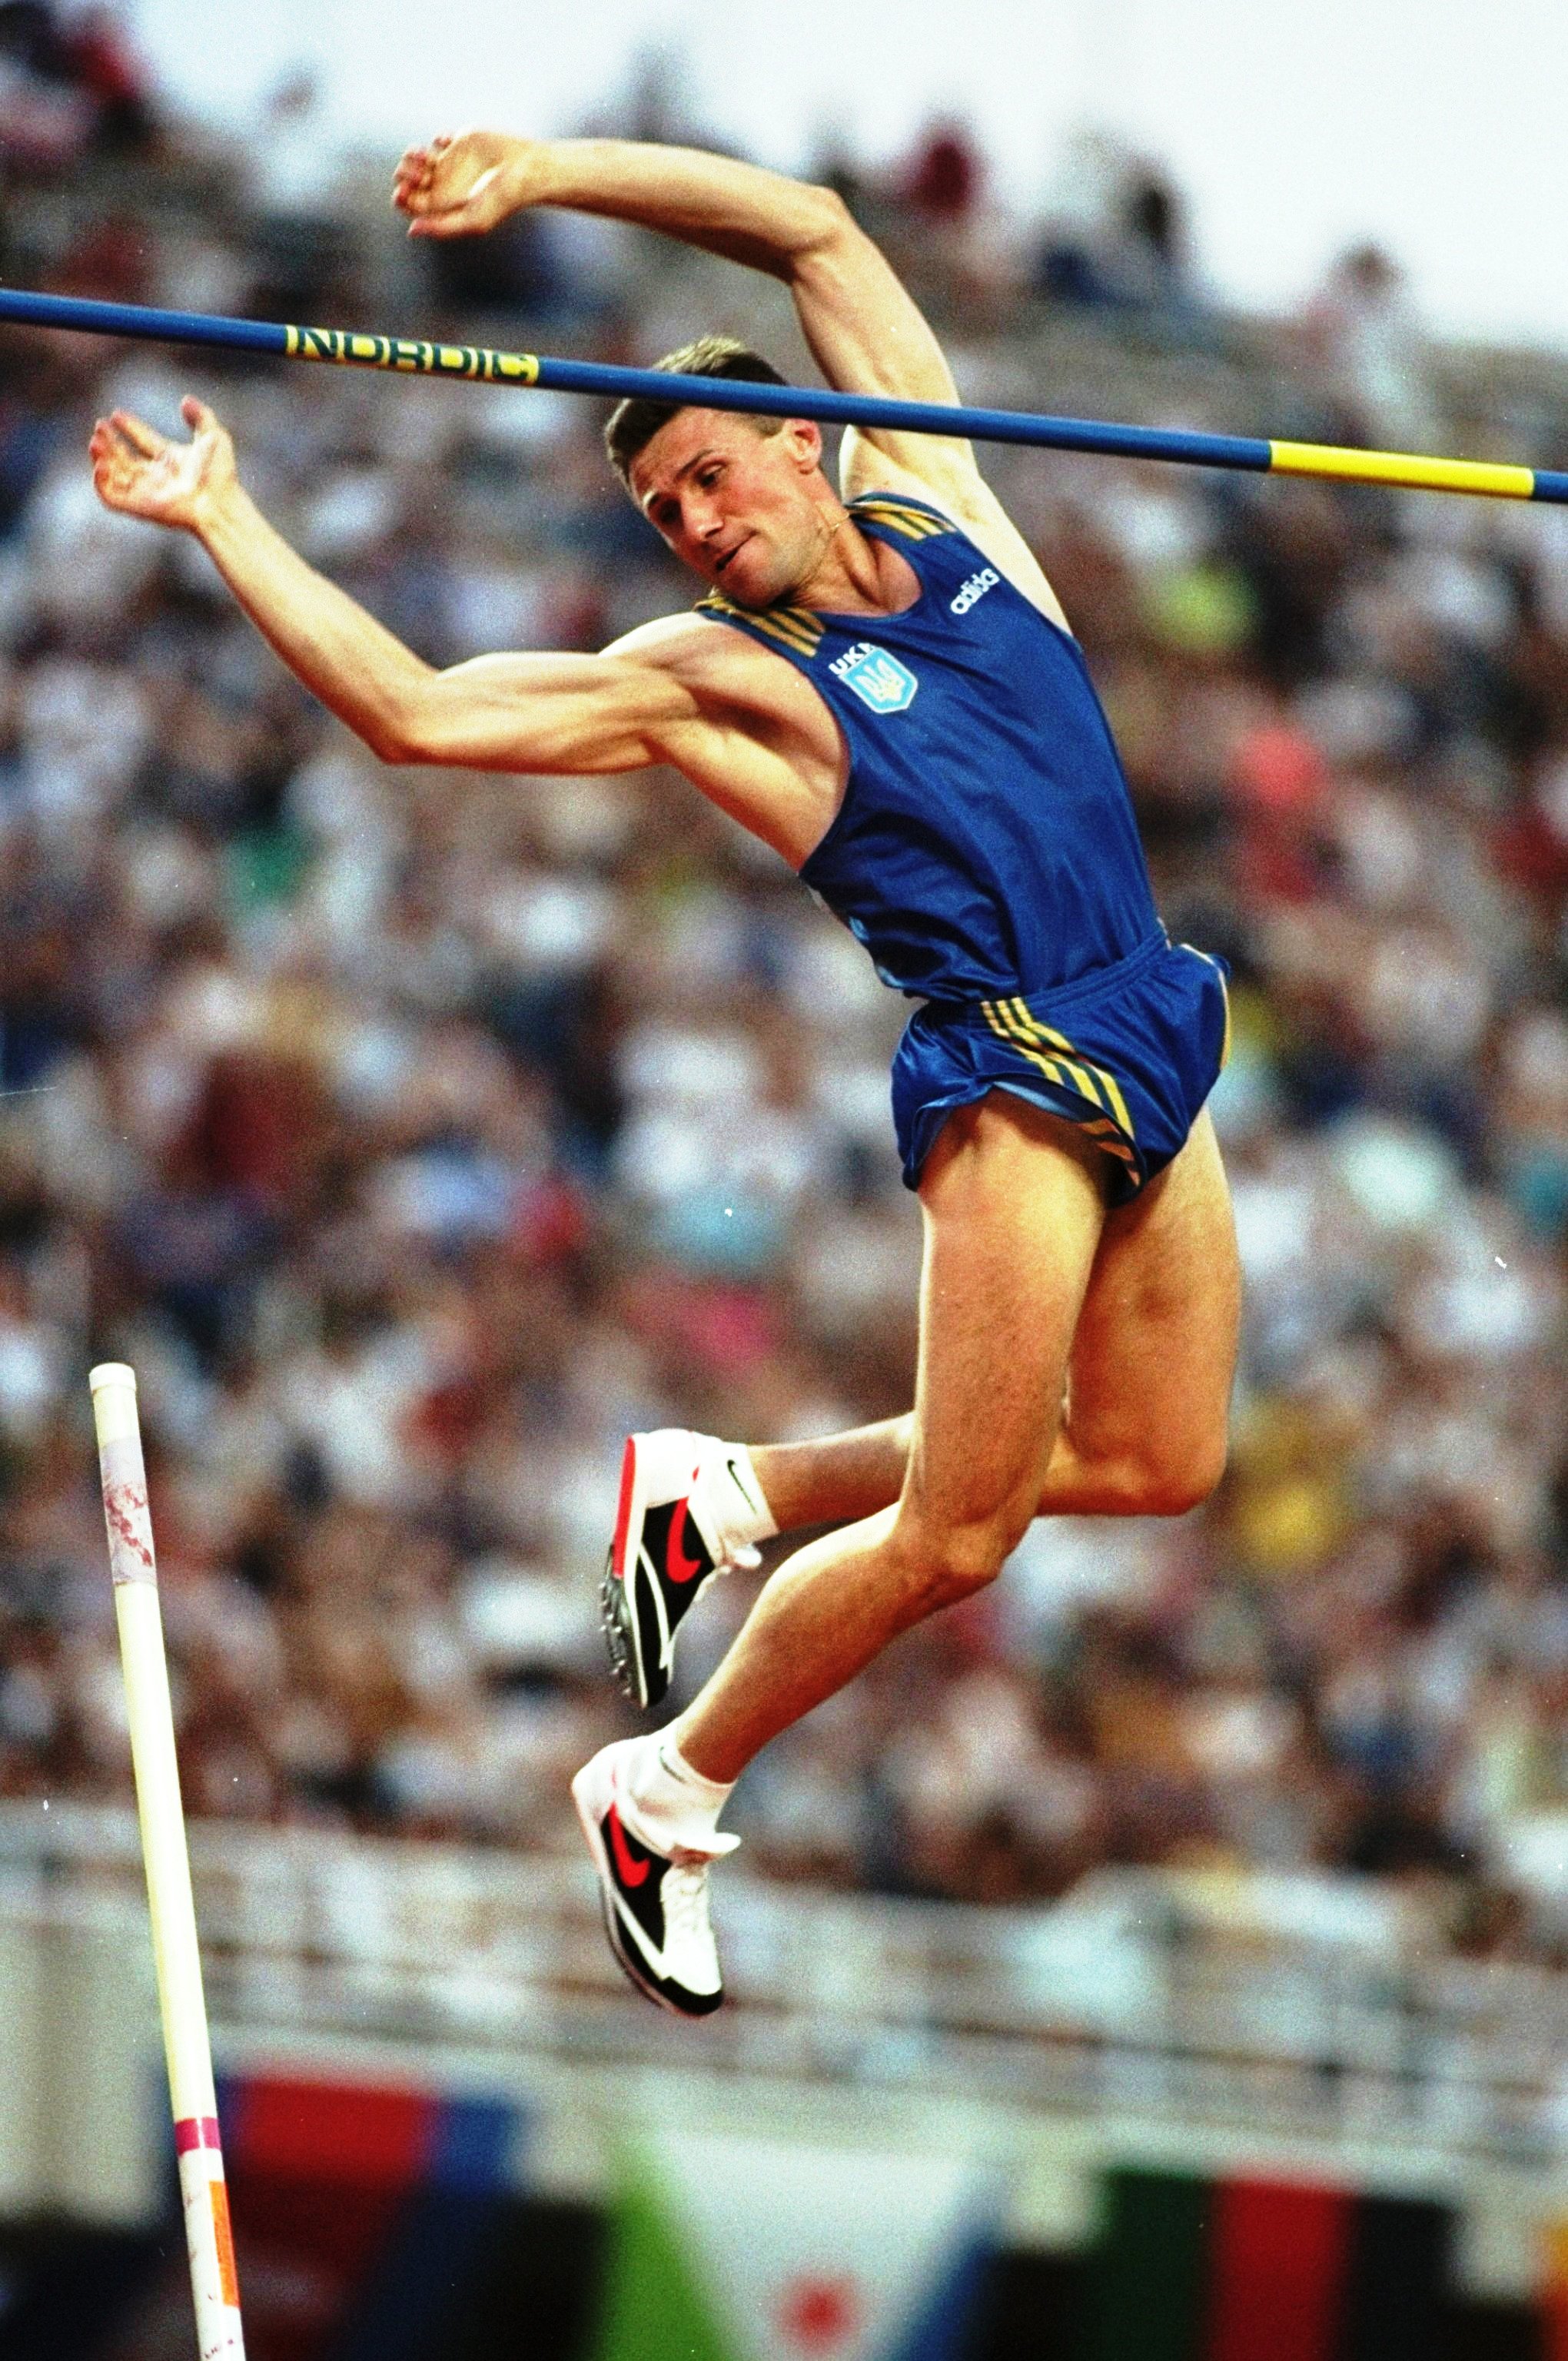  Sergey Bubka of the Ukraine clears the bar during the Pole Vault event at the World Championships at the Olympic Stadium in Athens, Greece. Bubka won the gold medal making it his sixth World Championship victory. 